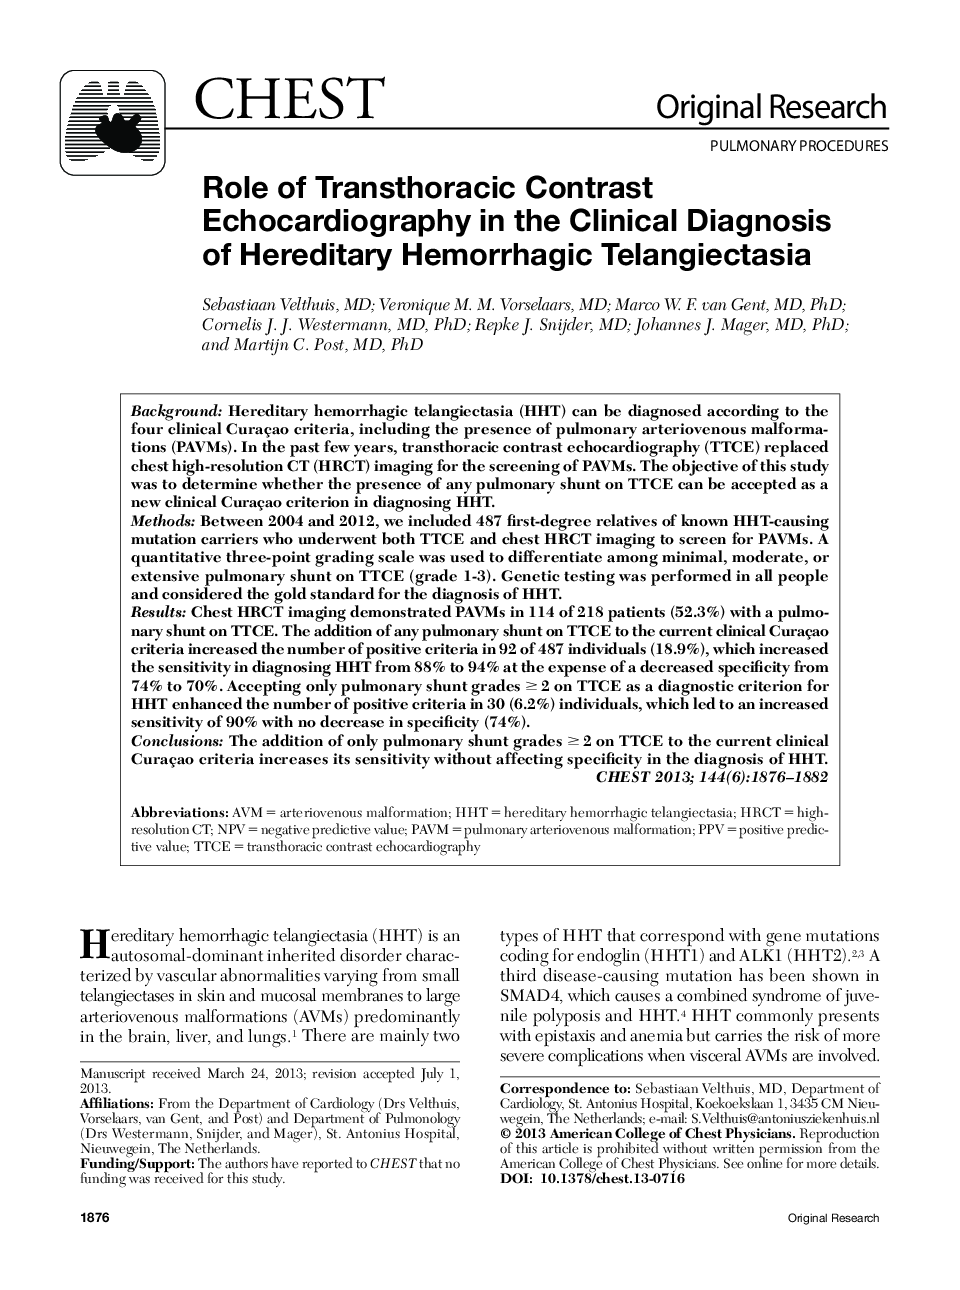 Role of Transthoracic Contrast Echocardiography in the Clinical Diagnosis of Hereditary Hemorrhagic Telangiectasia 